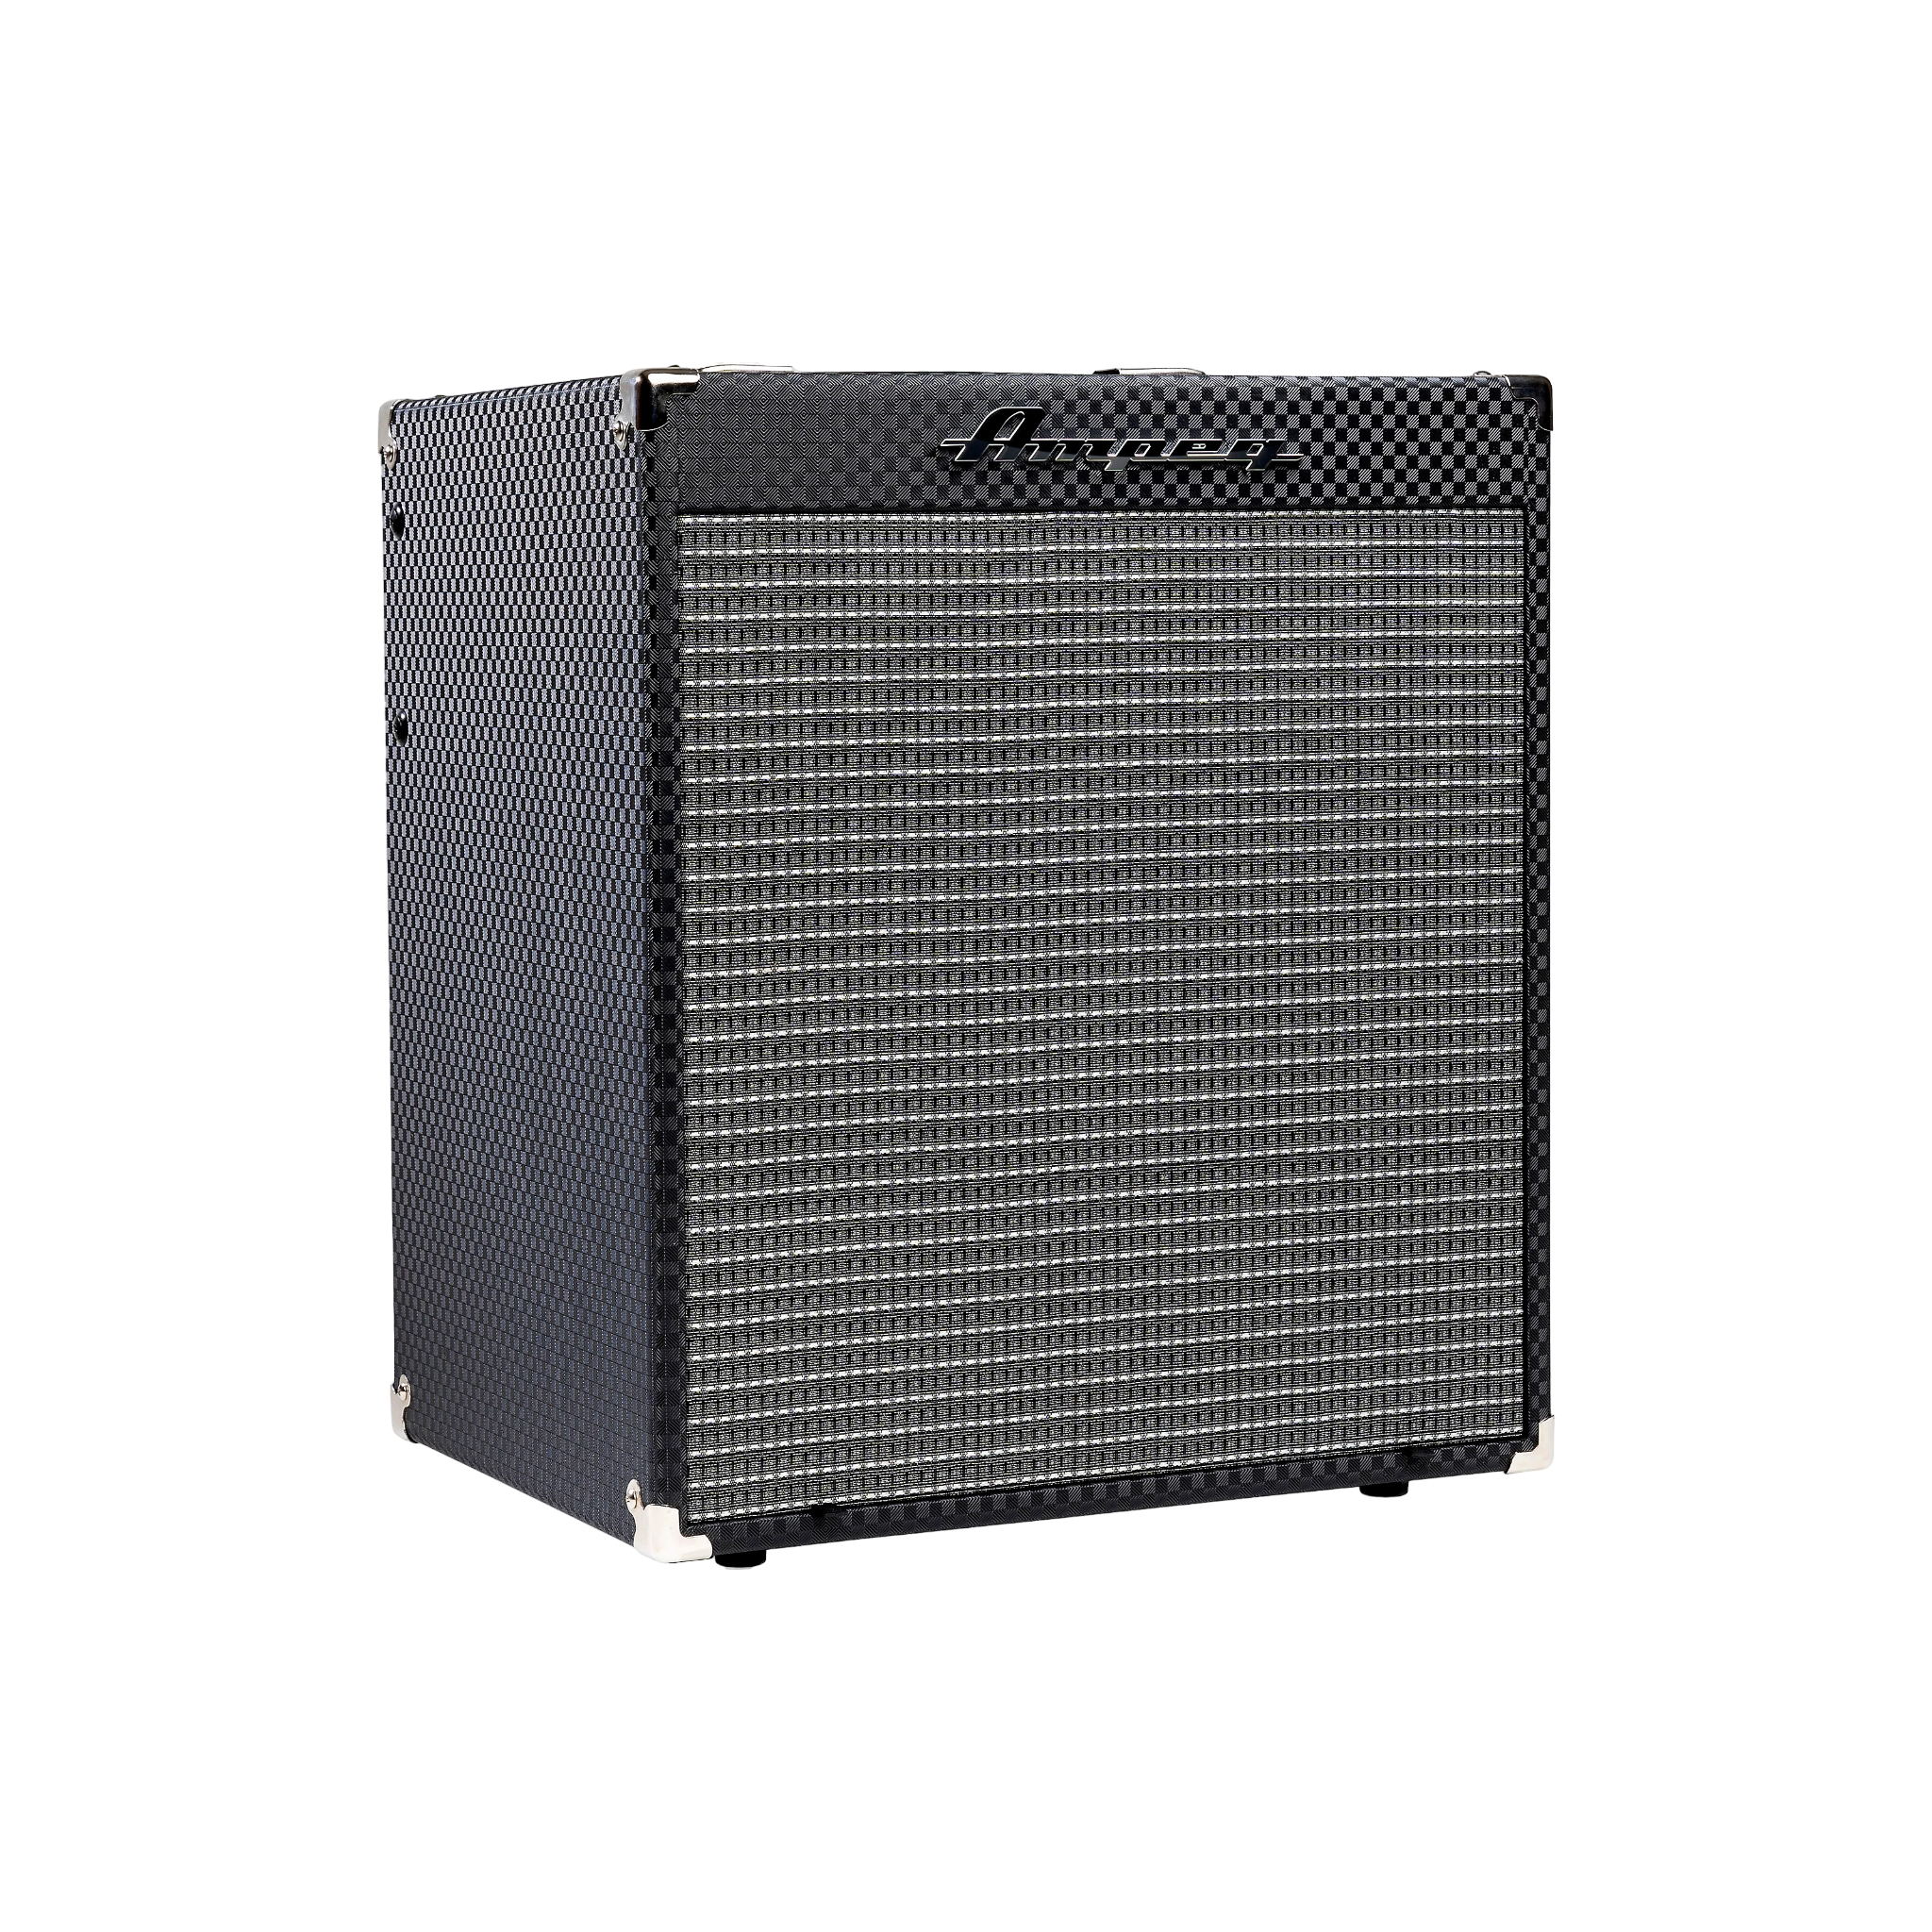 AMPEG Ampeg Rocket Bass RB-110 1x10 50W Bass Combo Amp Black and Silver